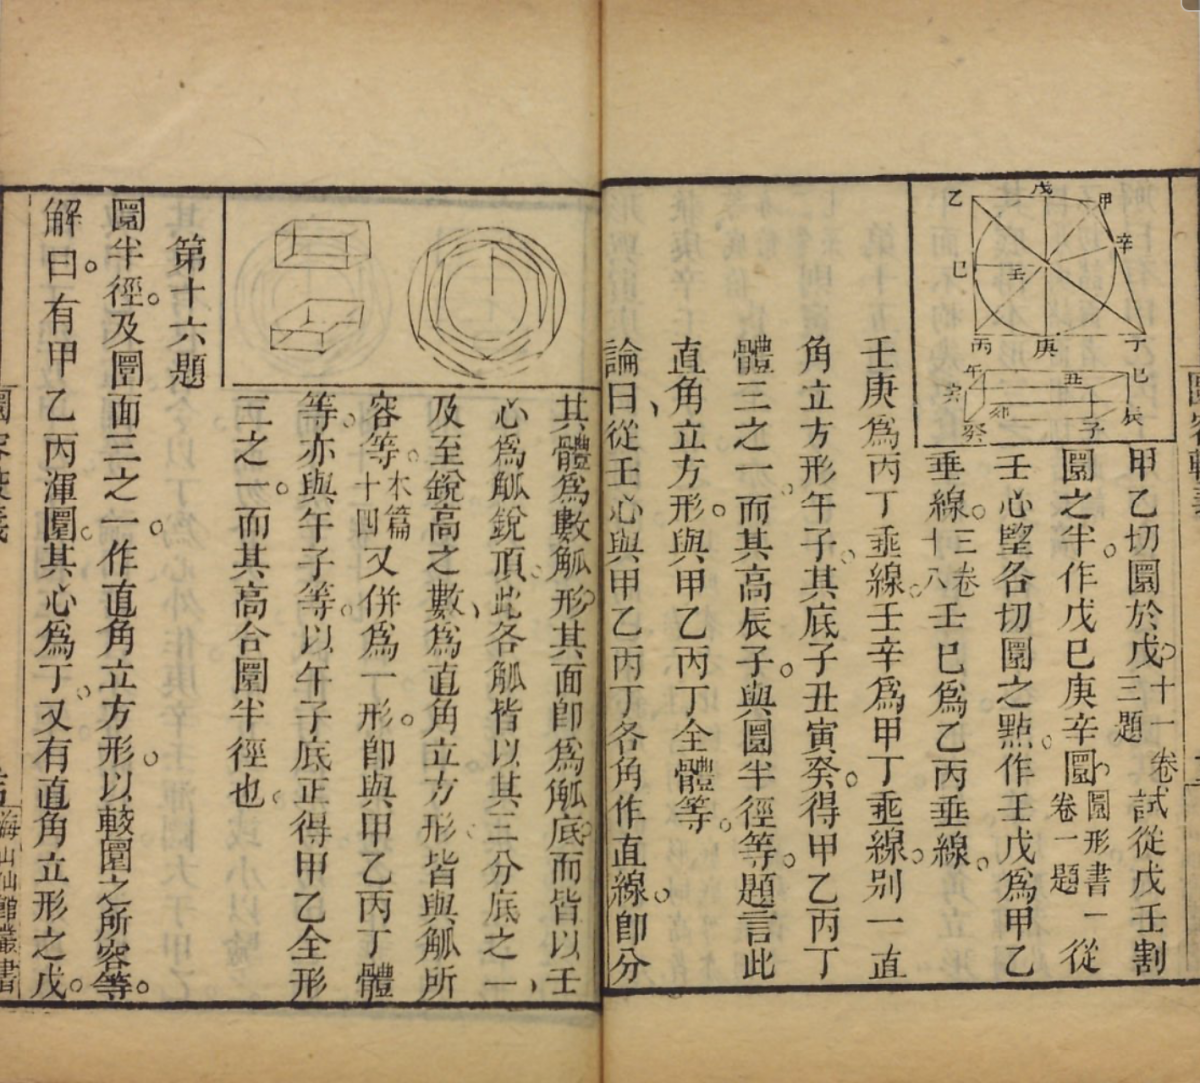 Pages from the 1847 printing of Matteo Ricci's and Li Zhizao's Yuan rong jiao yi.